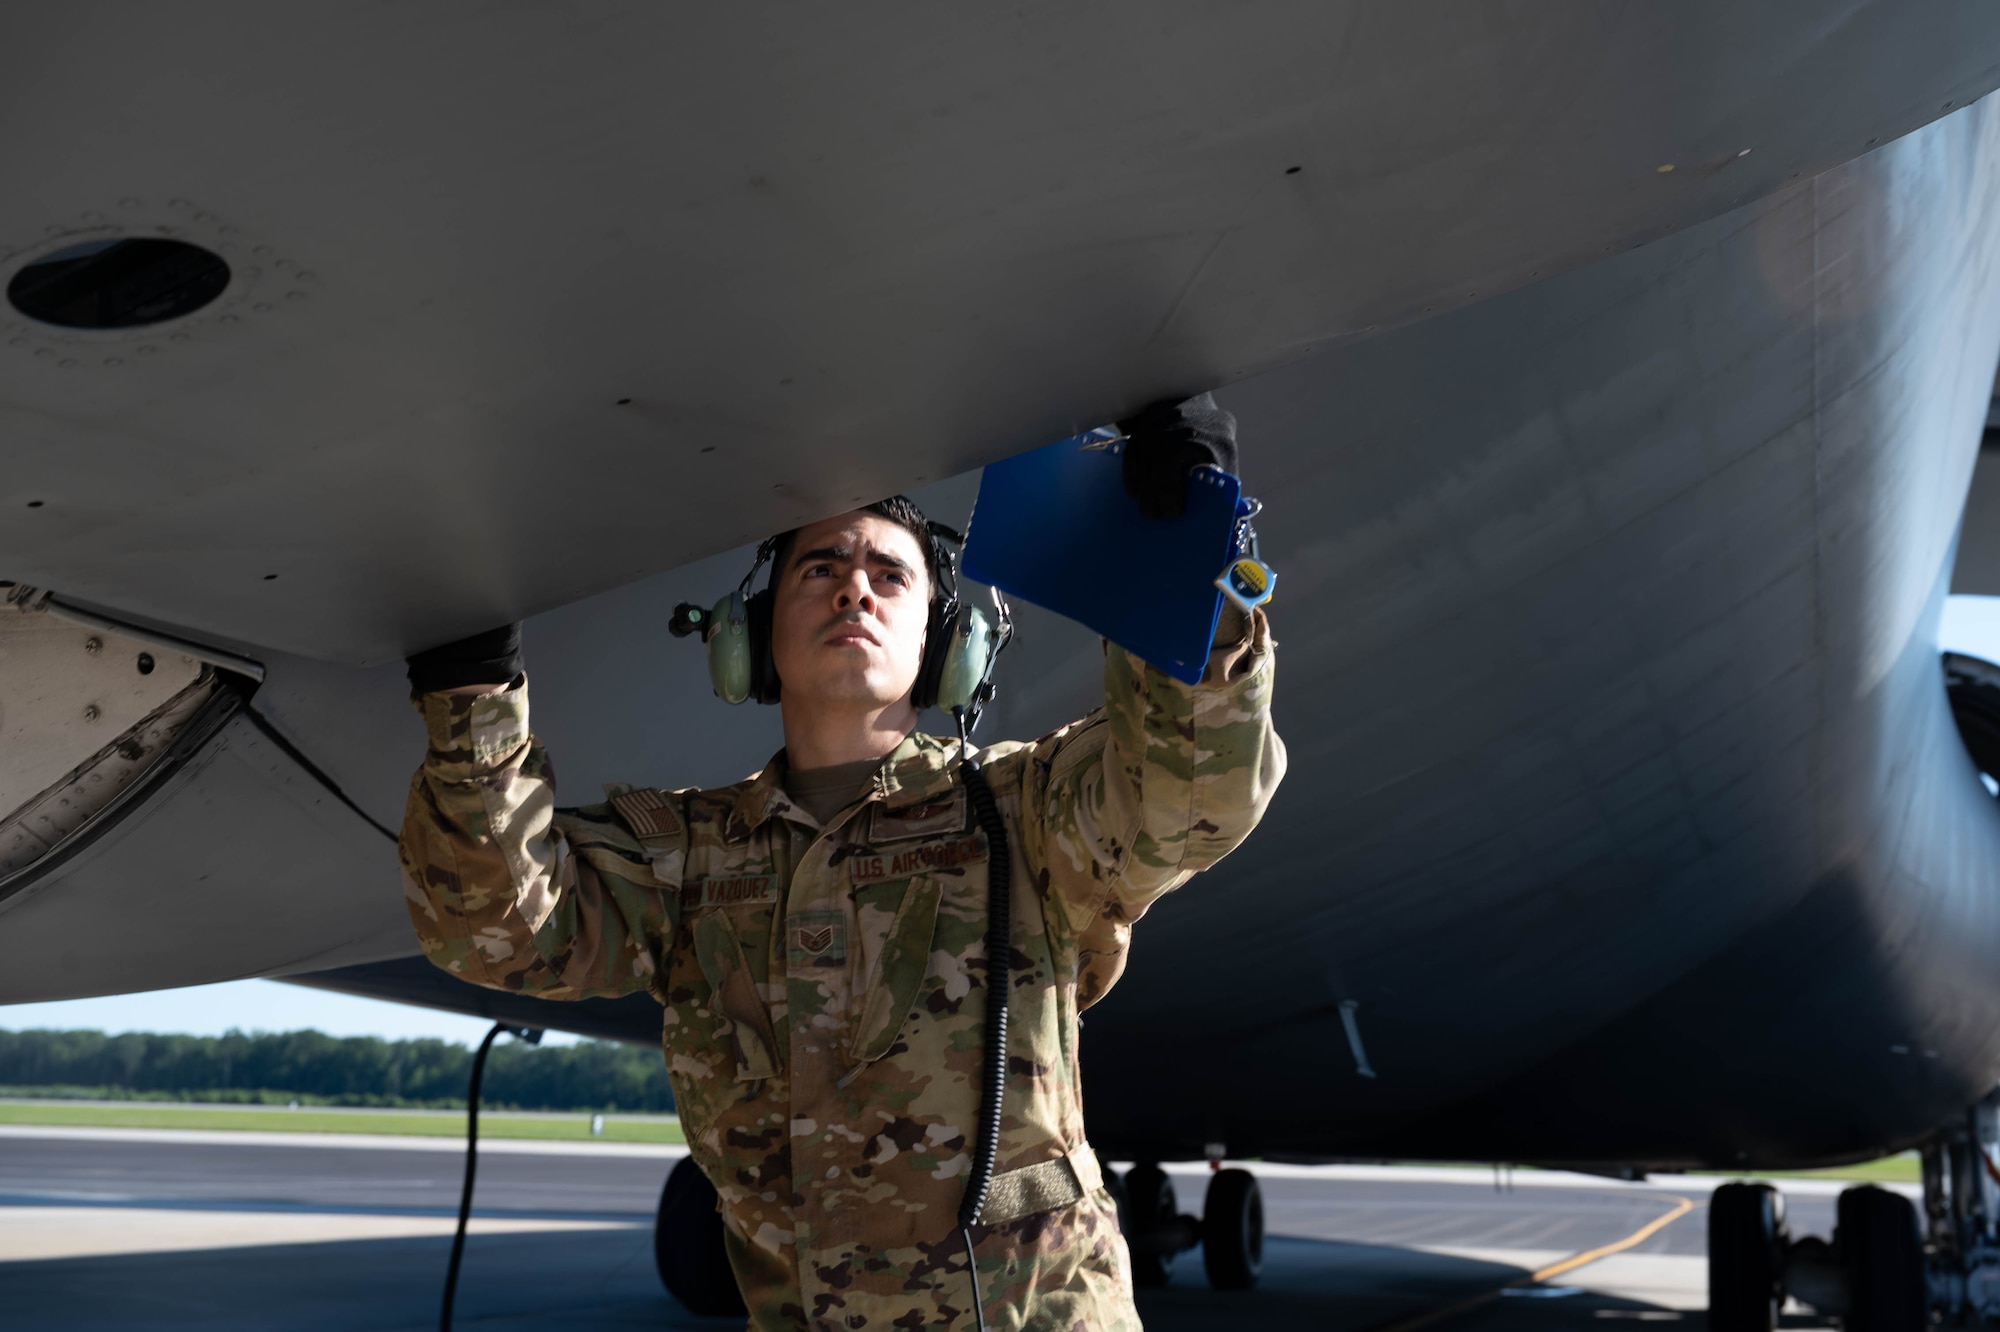 Staff Sgt. Israel Rivera Vazquez, 9th Airlift Squadron flight engineer, performs pre-flight checks before a local training mission at Dover Air Force Base, Delaware, June 23, 2021. The 9th AS routinely trains to provide global reach with unique outsized and oversized airlift capabilities on the C-5M Super Galaxy. (U.S. Air Force photo by Senior Airman Faith Schaefer)